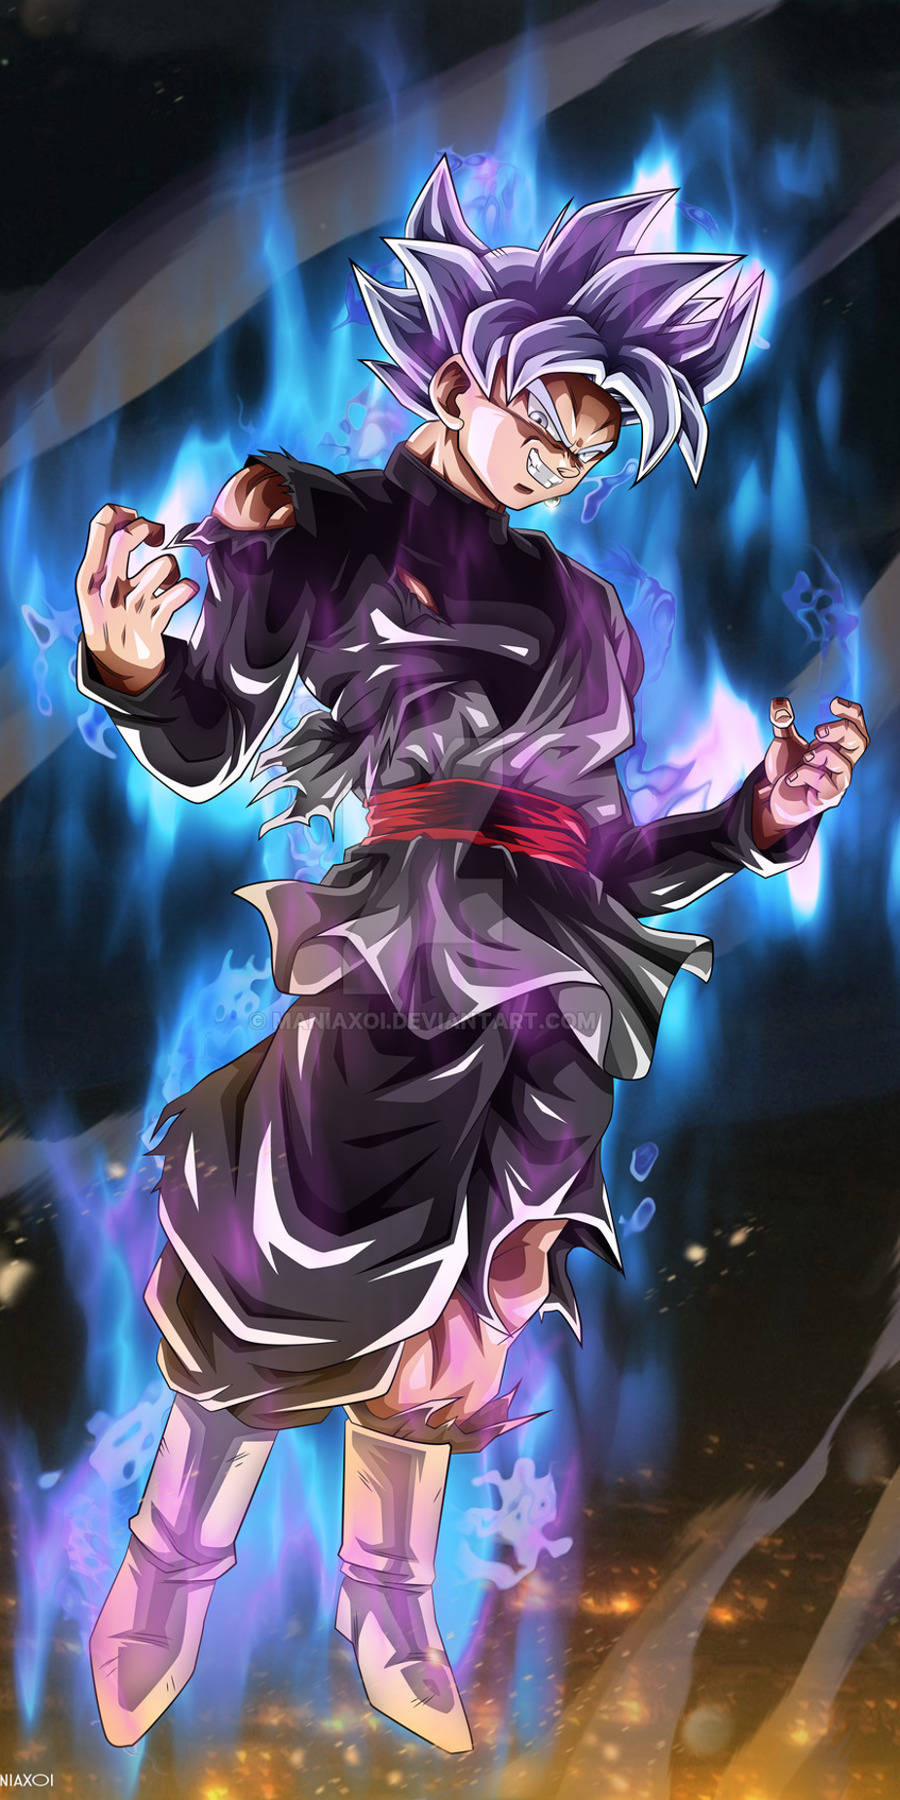 Enraged Goku Black Ready To Unleash The Full Power Of His Form Wallpaper